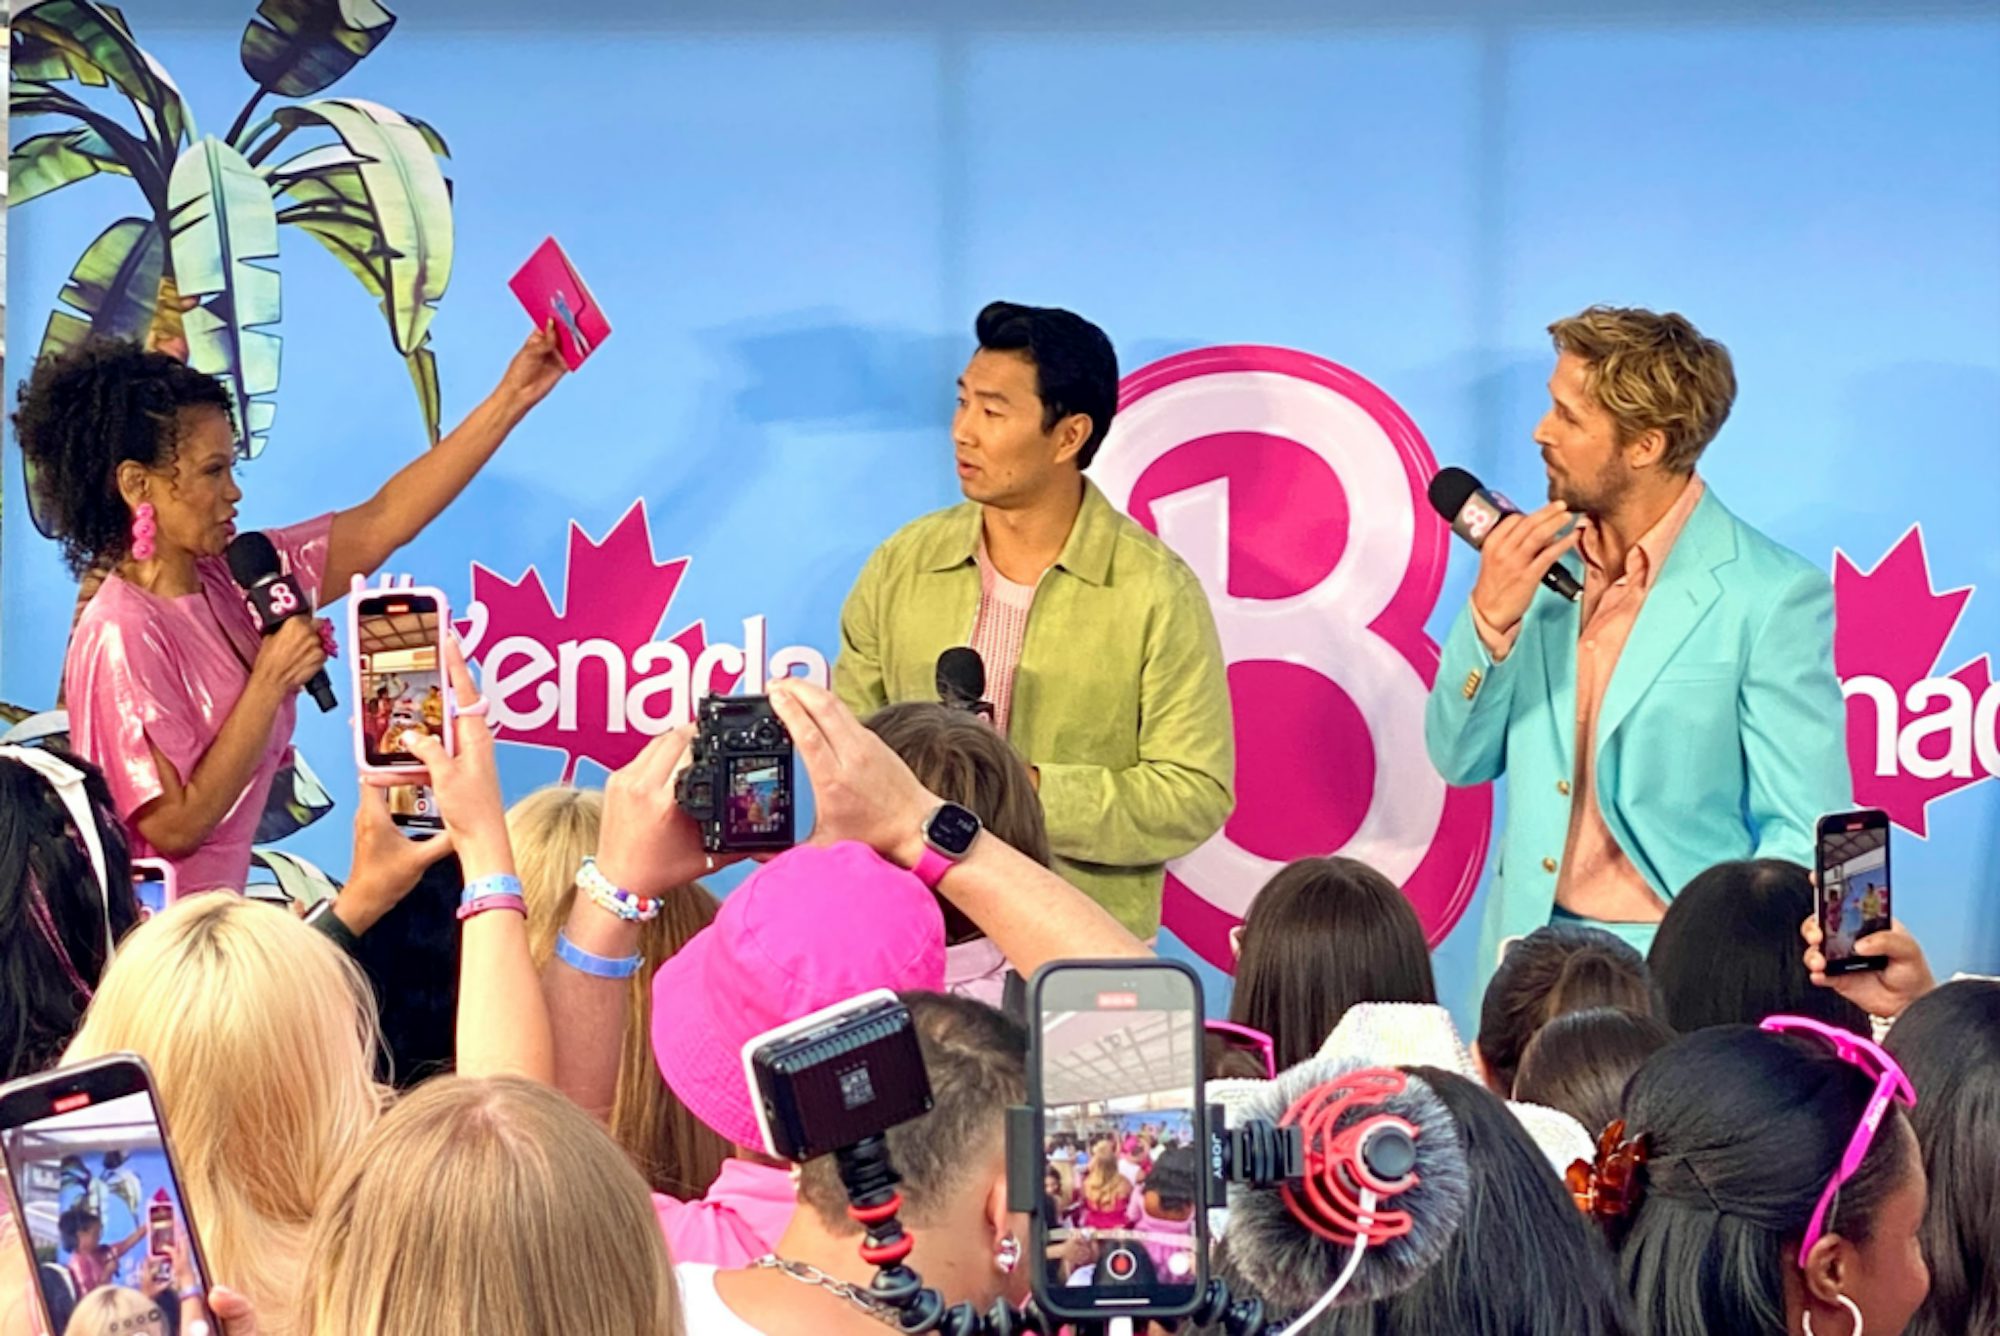 Traci Melchor interviewing the cast of Barbie with fans taking photos